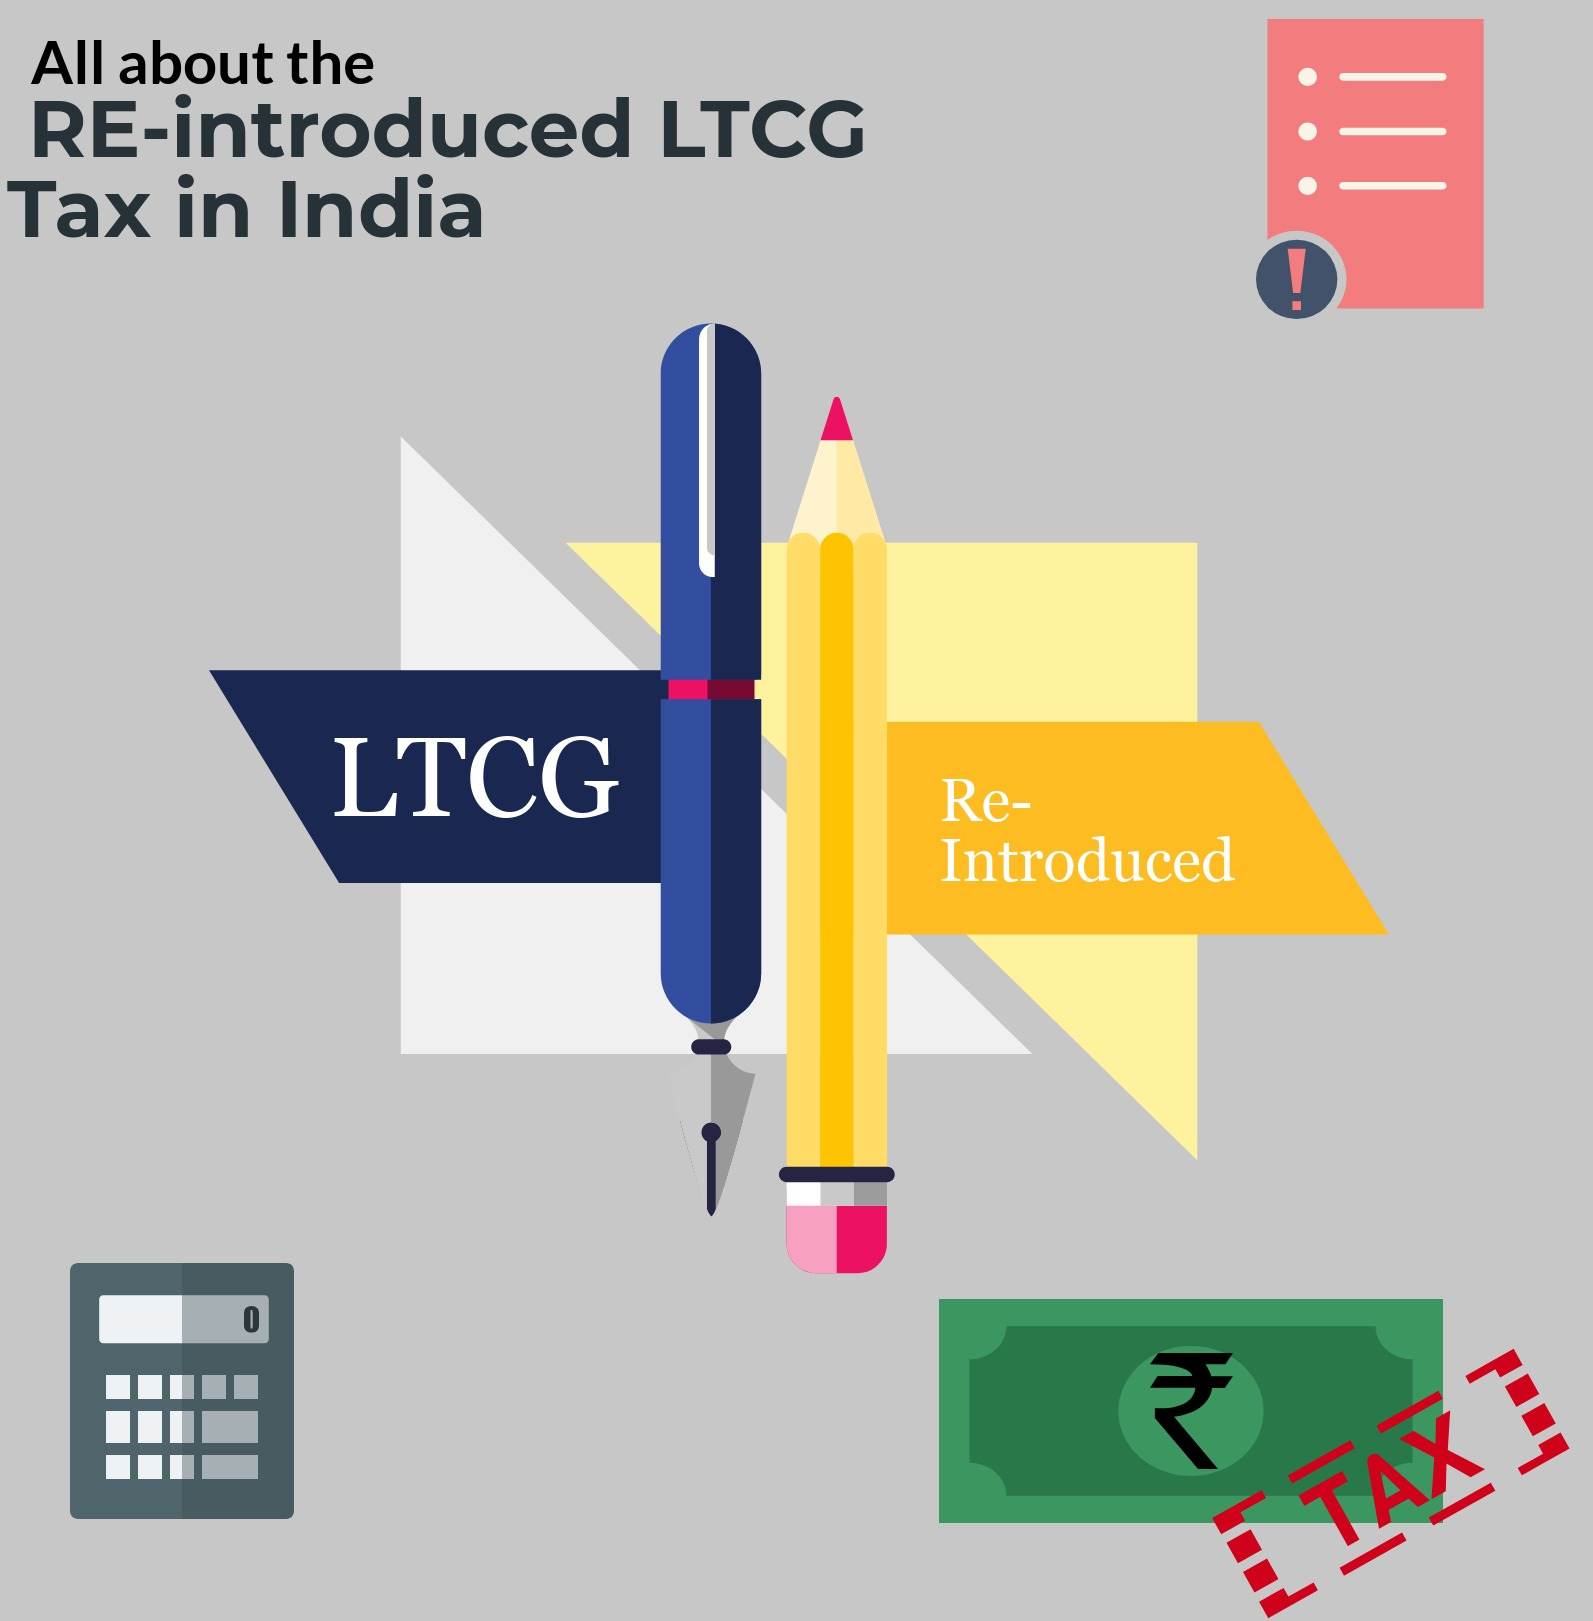 All about the re-introduced Long Term Capital Gains Tax (LTCG tax) in India 2